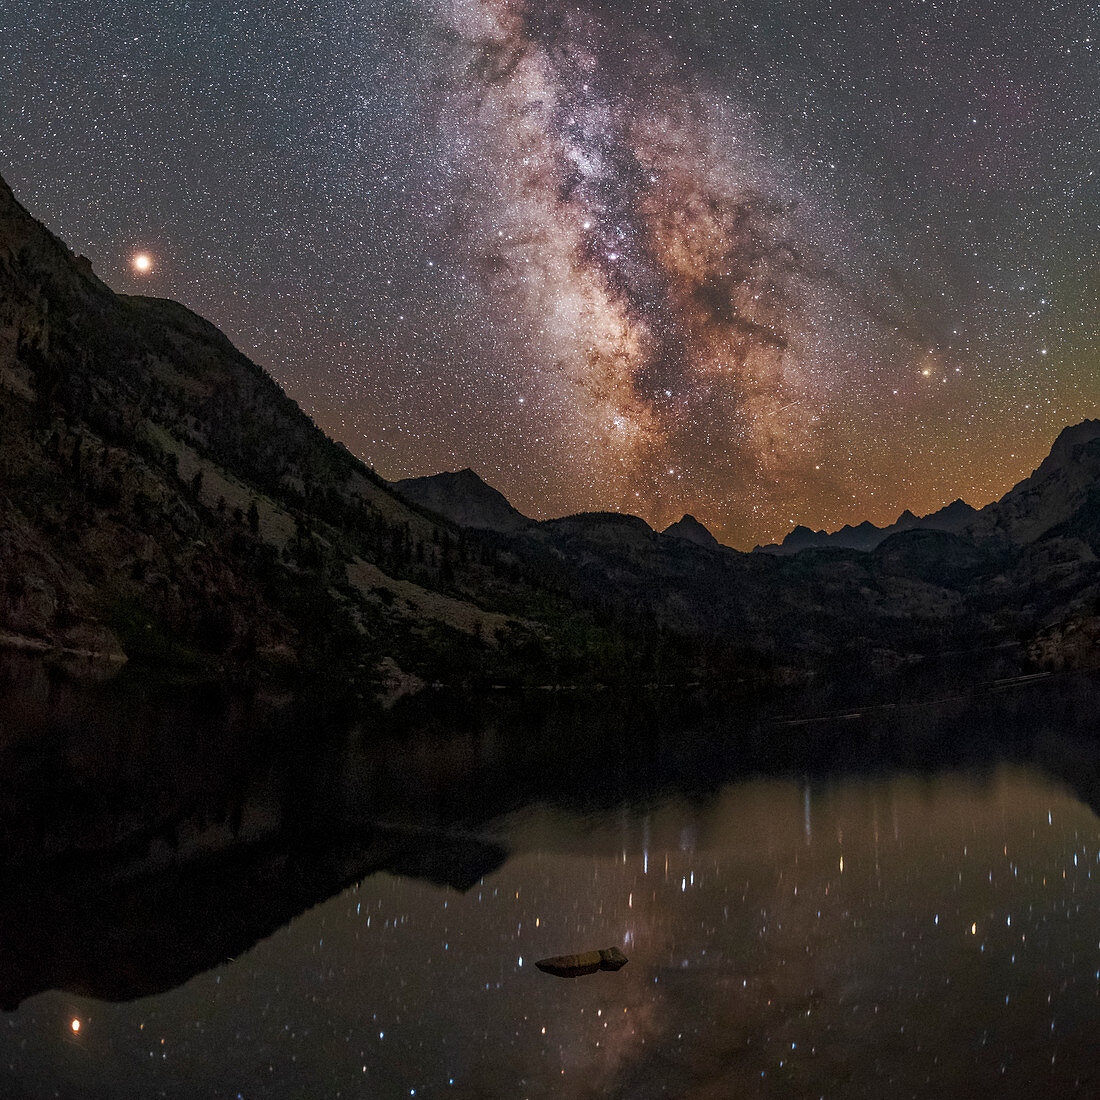 Milky Way and Mars over a mountain lake